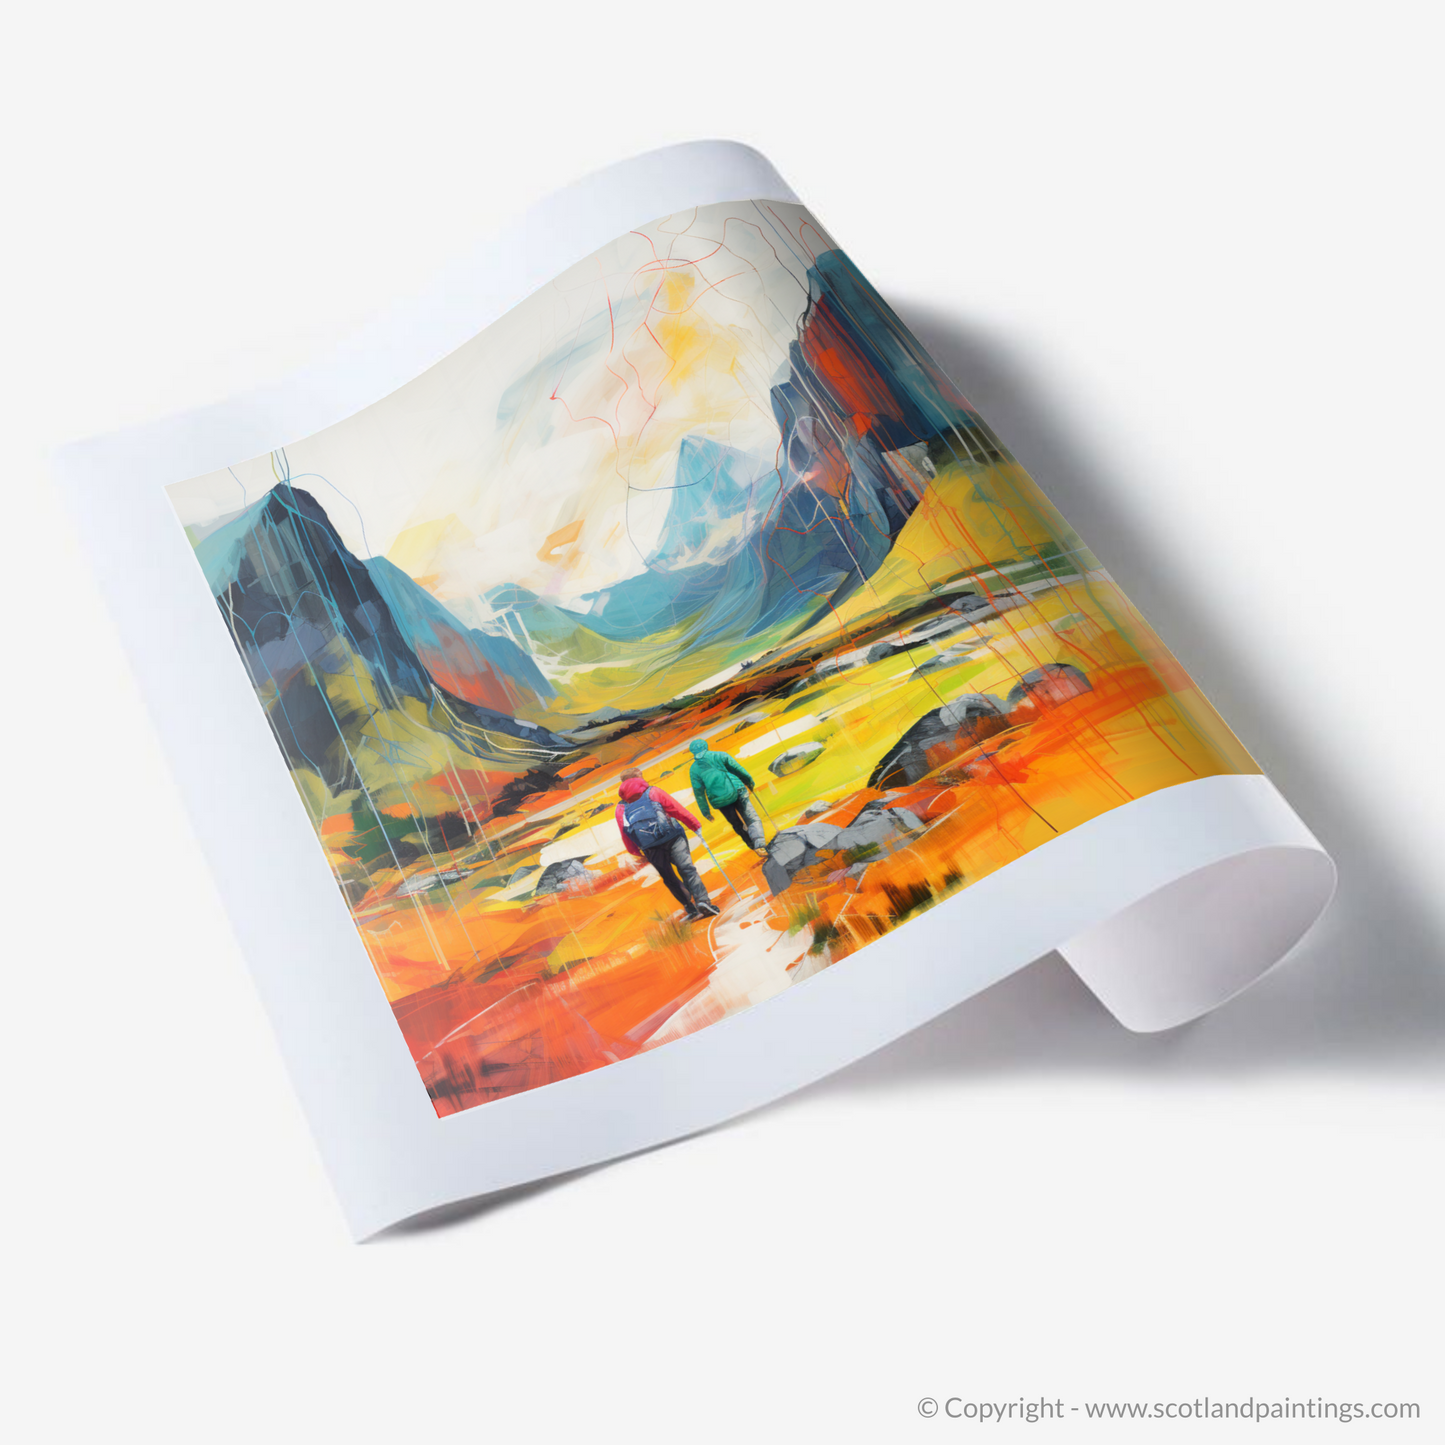 Painting and Art Print of Hikers in Glencoe. Hikers' Journey Through the Vibrant Glencoe Highlands.